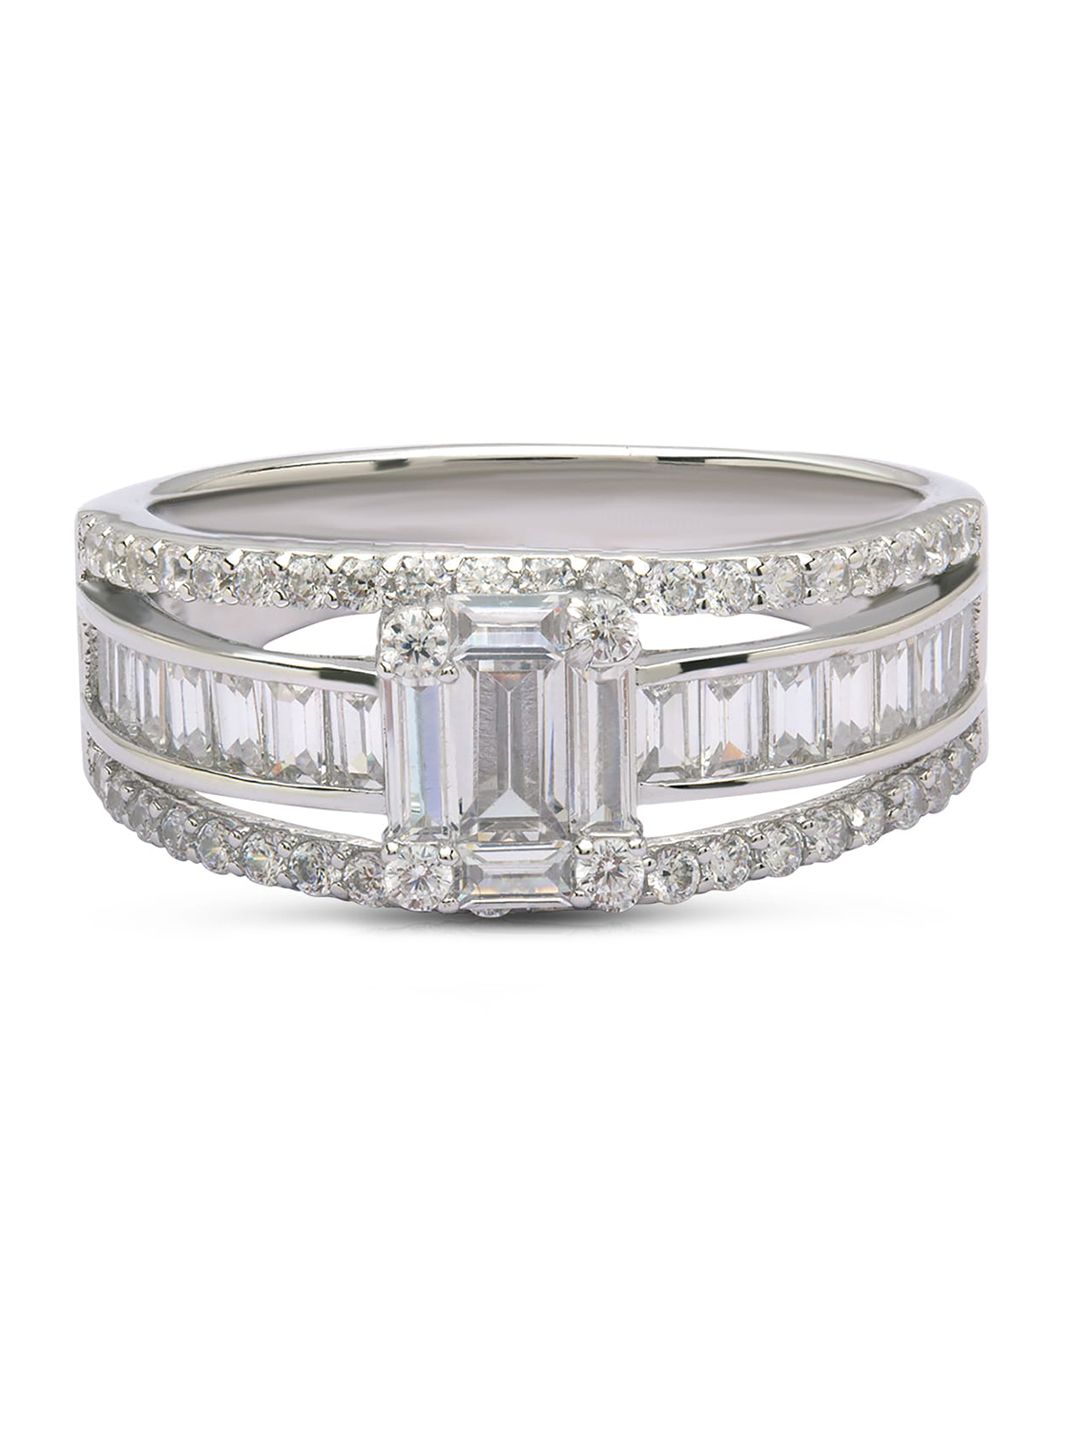 ANAYRA Silver-Toned 925 Sterling Silver Sparkling Ring Price in India